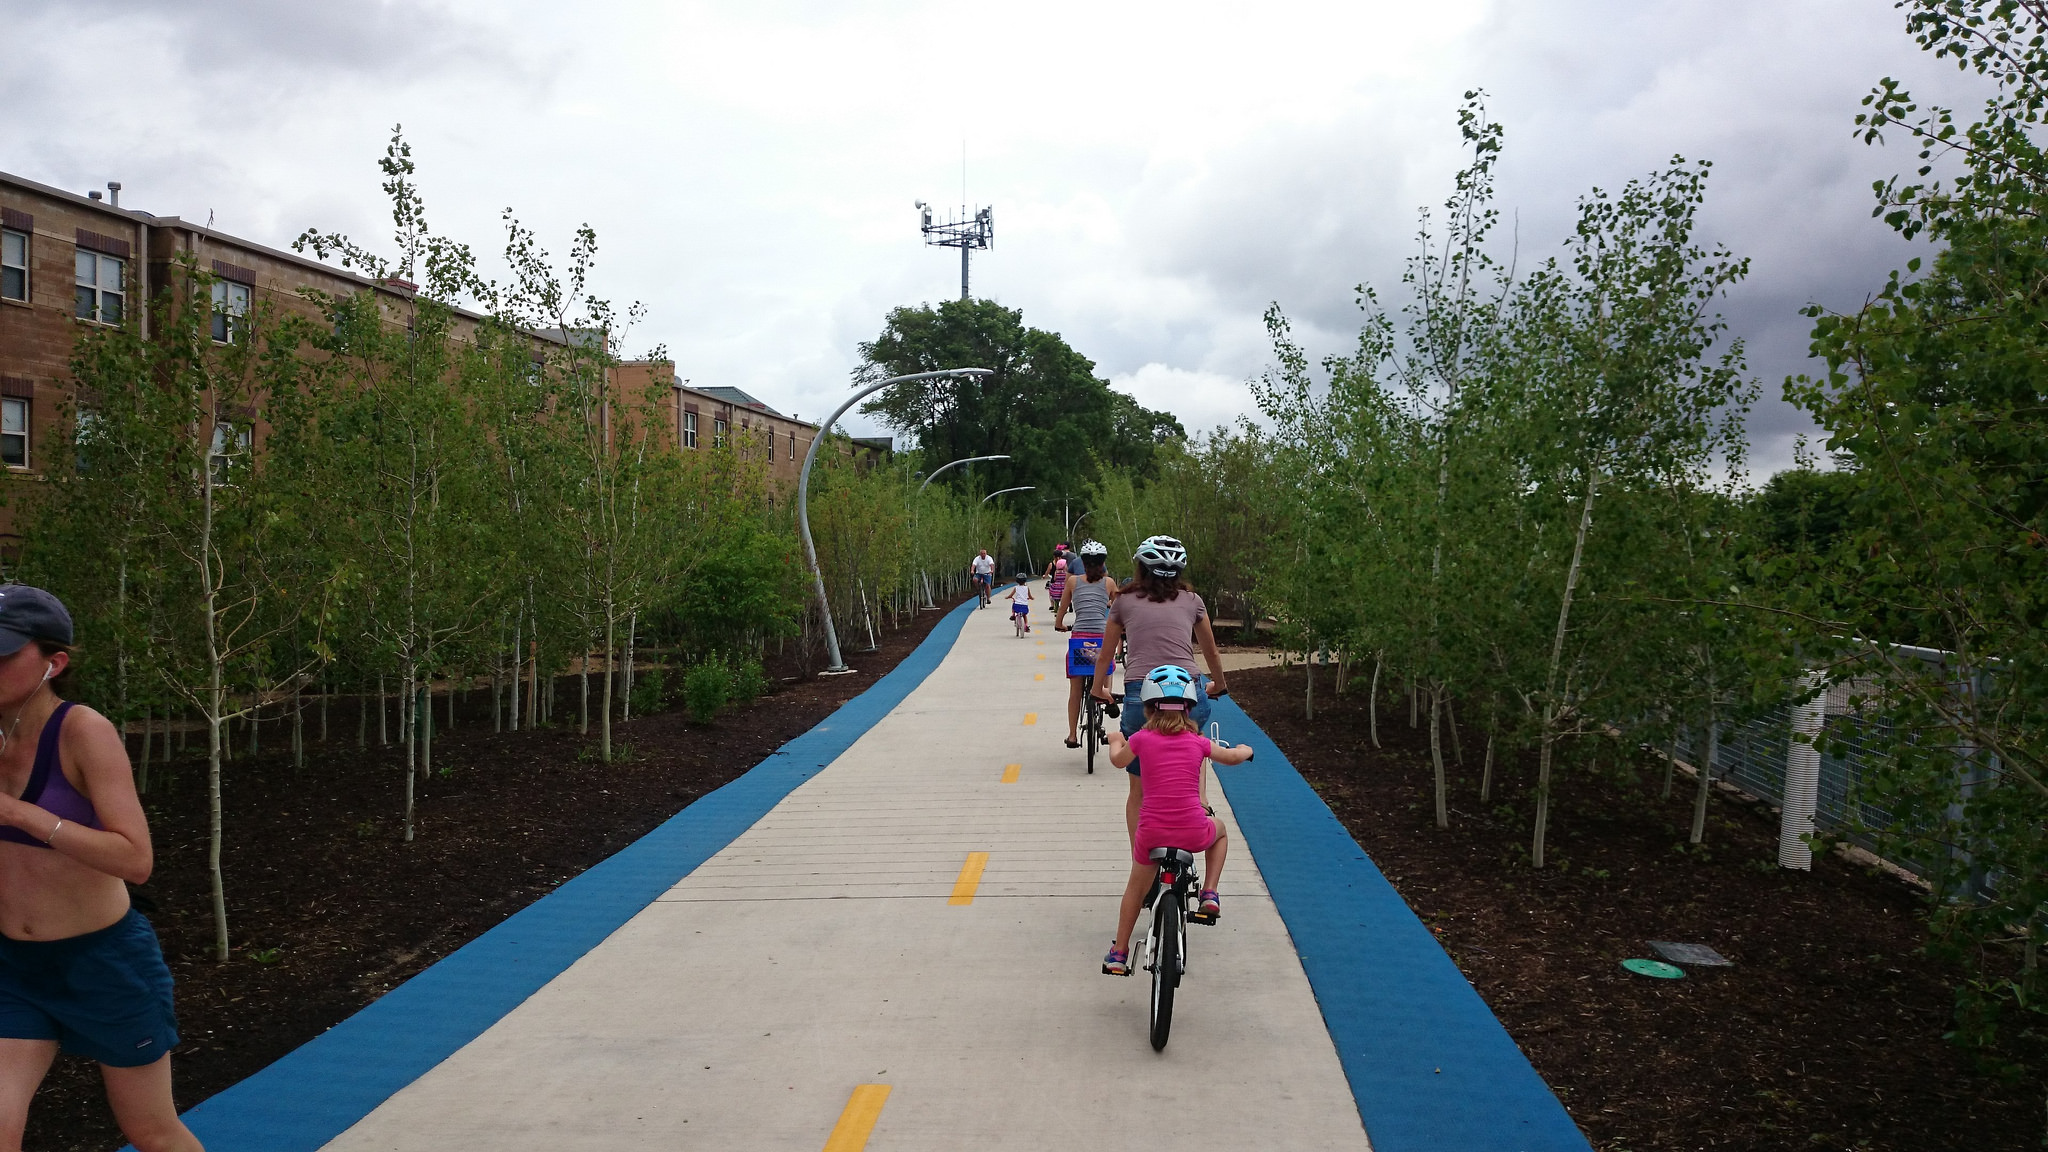 In Chicago, an Inviting New Trail Brings Urban Promise, and a Few Misgivings